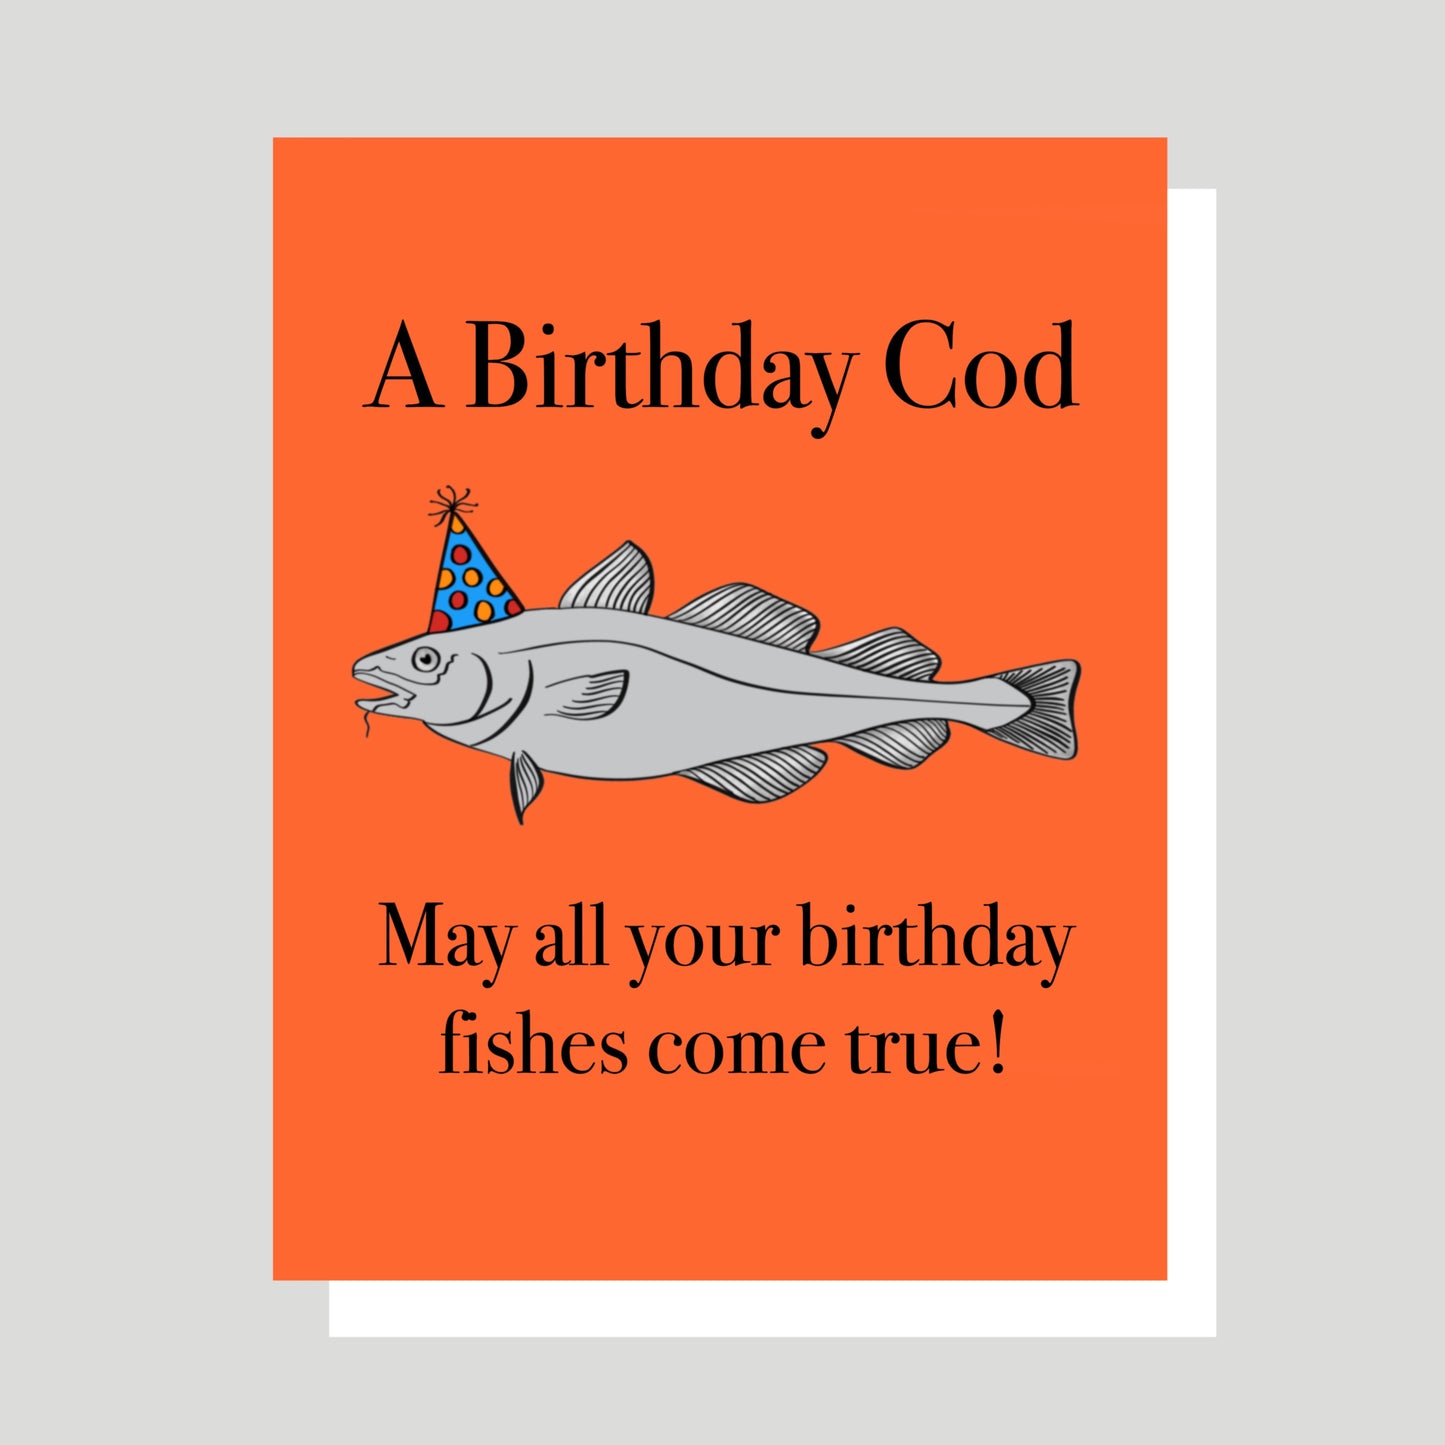 "A Birthday Cod" is one of our best selling greeting cards.  This unique and humorous card features a burnt-orange background with a gray cod fish sporting a polka dotted birthday hat, and is sure to put a smile on your face. All original artwork is created by Jennifer Knight.  NewWingStudio.com